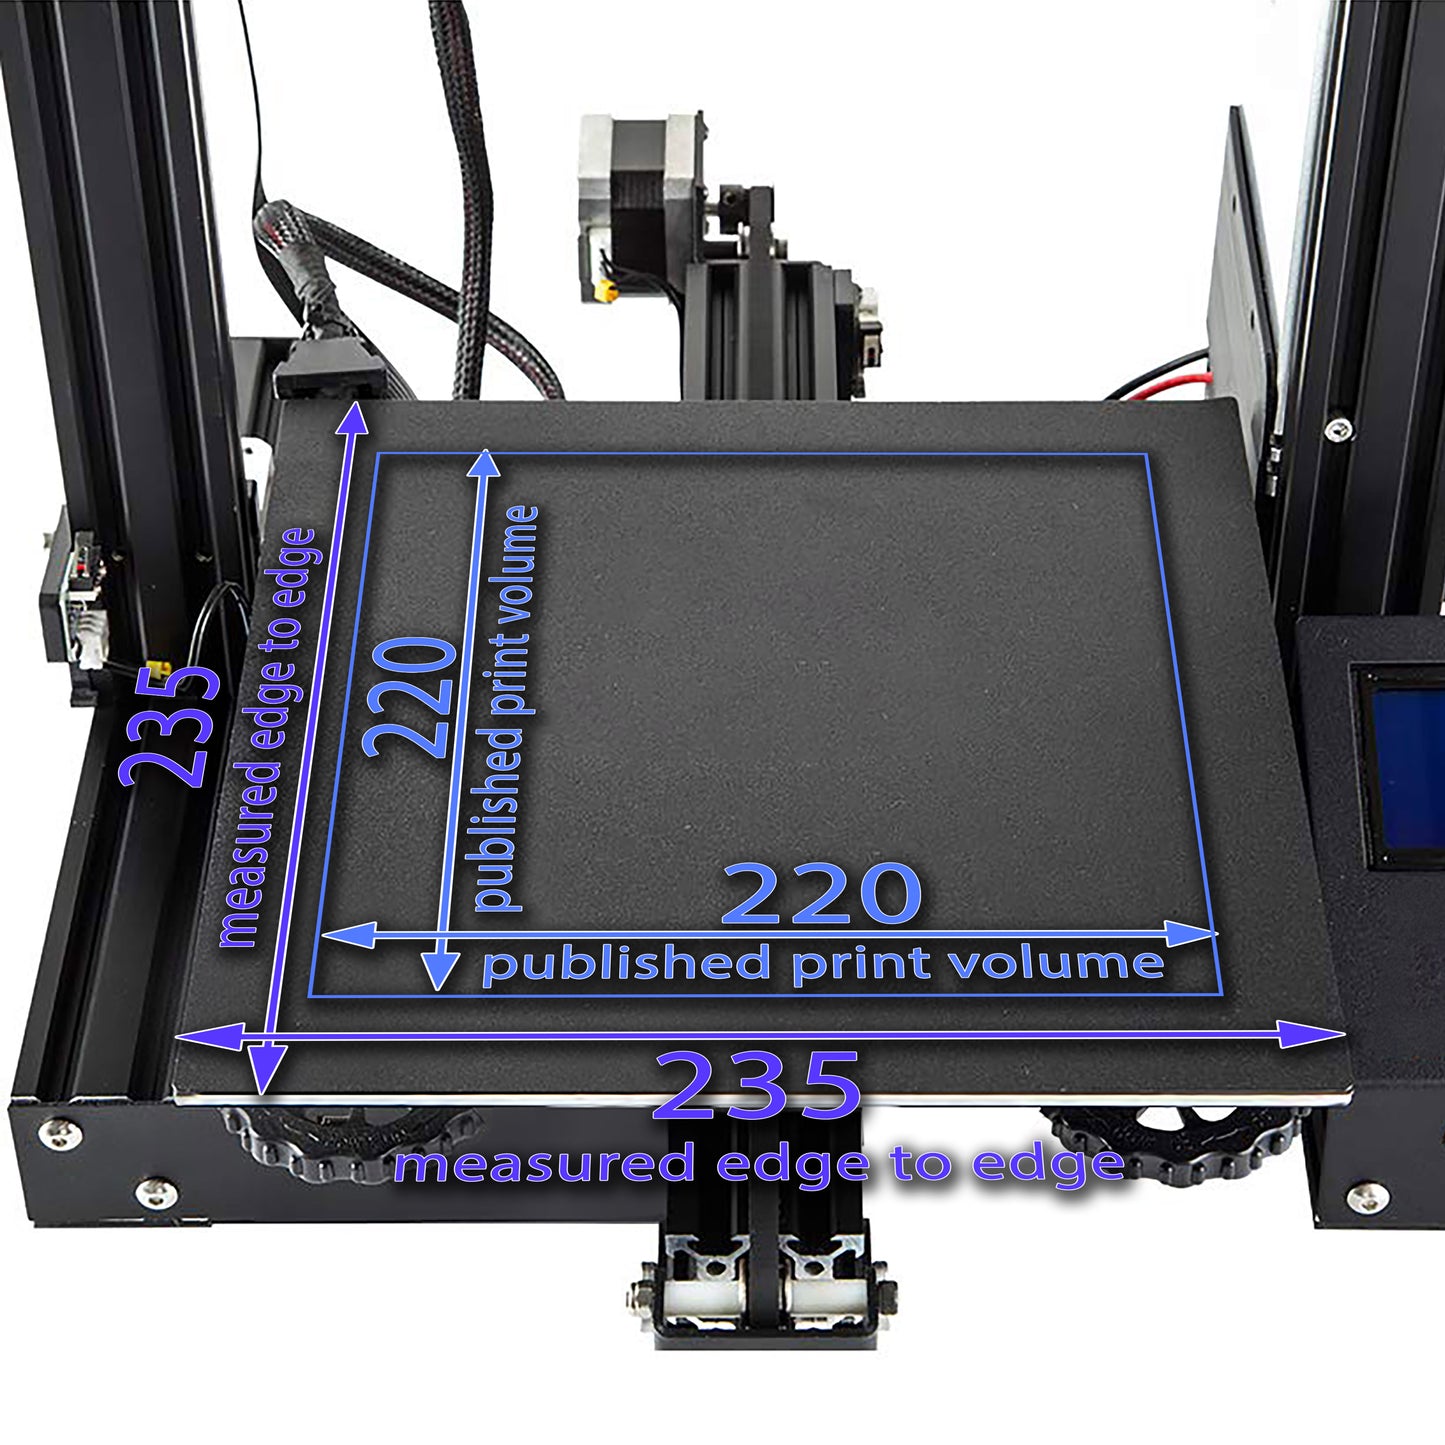 254 x 235 Kit with Pre-Installed PEX Build Surface - Prusa i3 MK3/S/+, Raise3D N1, MatterHackers Pulse